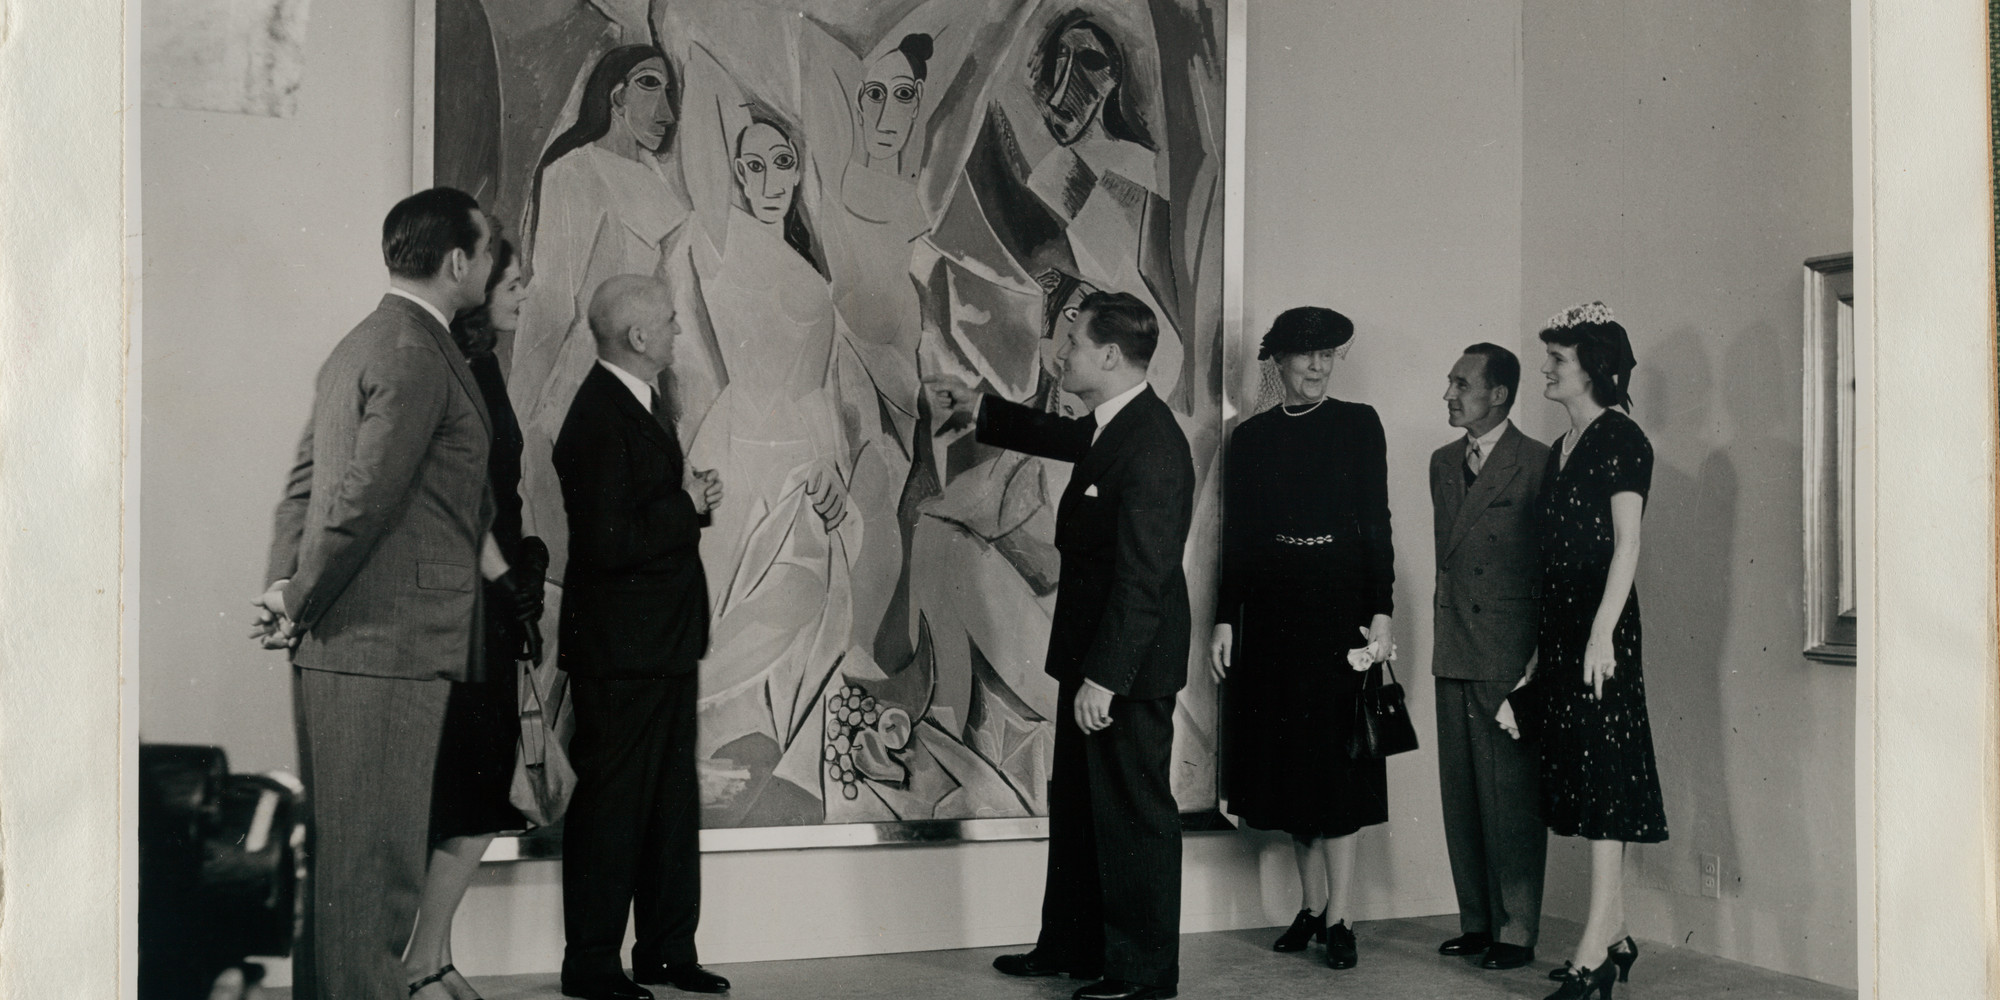 Pablo Picasso’s *Les Demoiselles d’Avignon (1907), upon its acquisition. From left: John Hay Whitney, Lily Emmet Cushing, A. Conger Goodyear, Nelson A. Rockefeller, Jeanie Sheppard, Edsel Ford, and Elizabeth Bliss Parkinson. 1939. A. Conger Goodyear Scrapbooks, 52